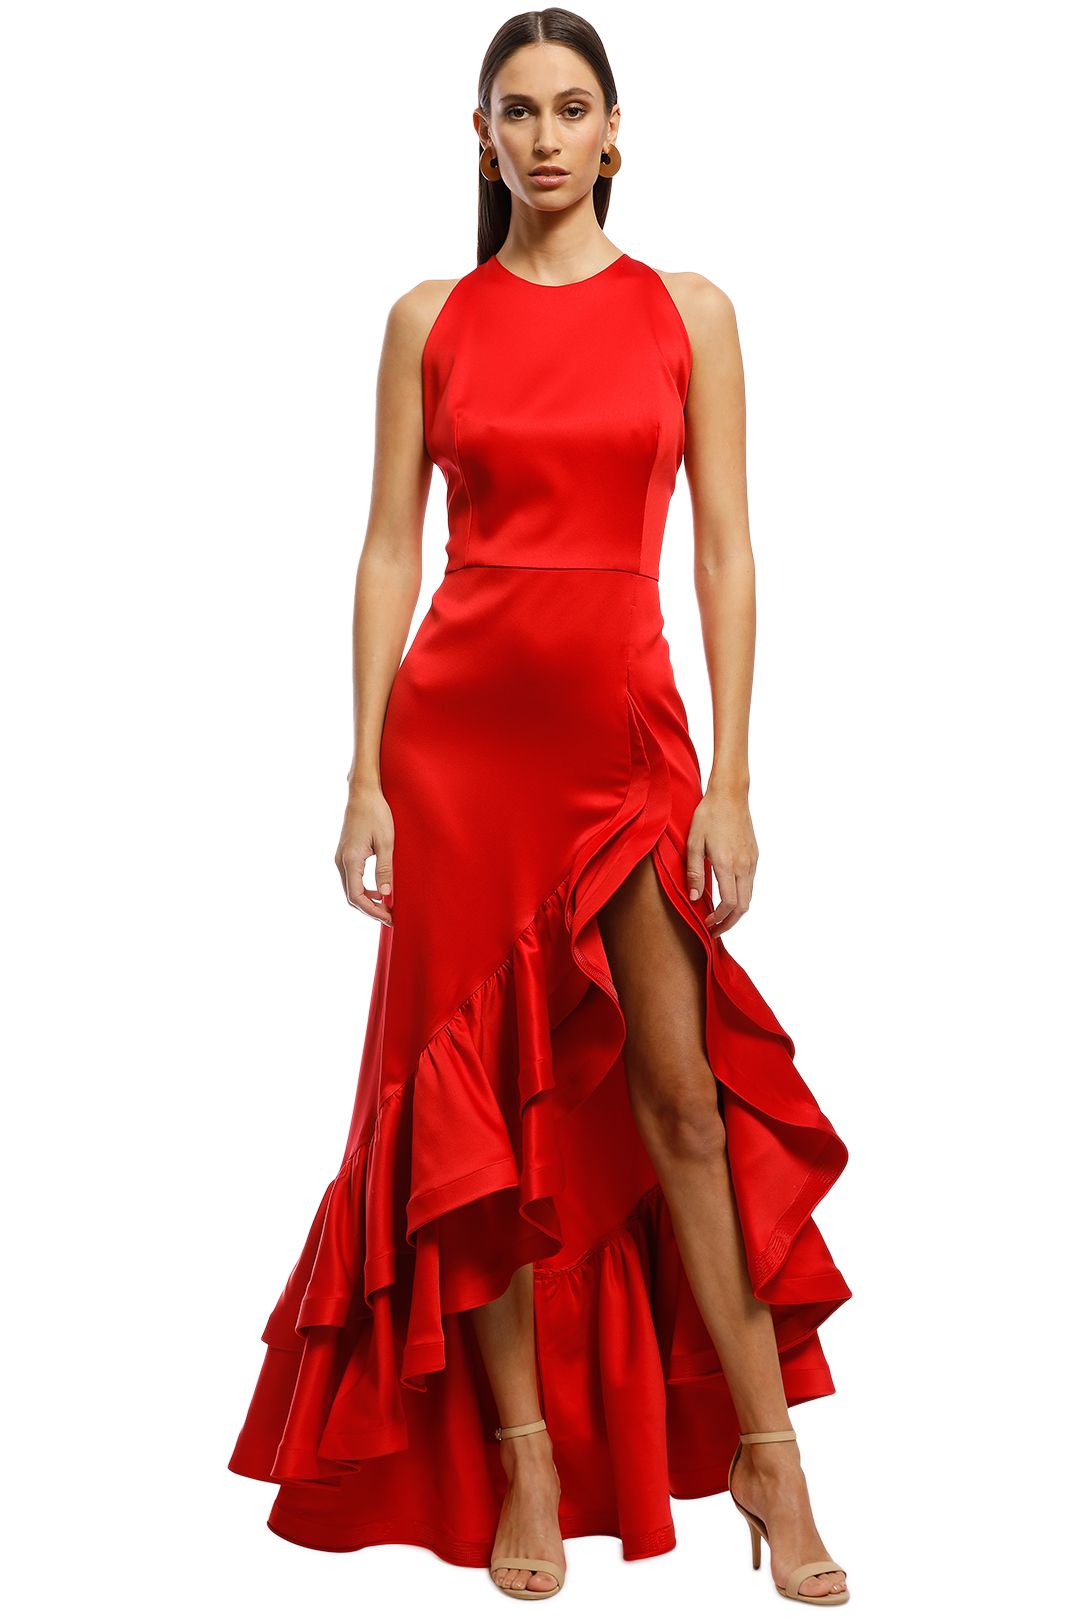 Bronx and Banco - Frida Flame Dress - Red - Front